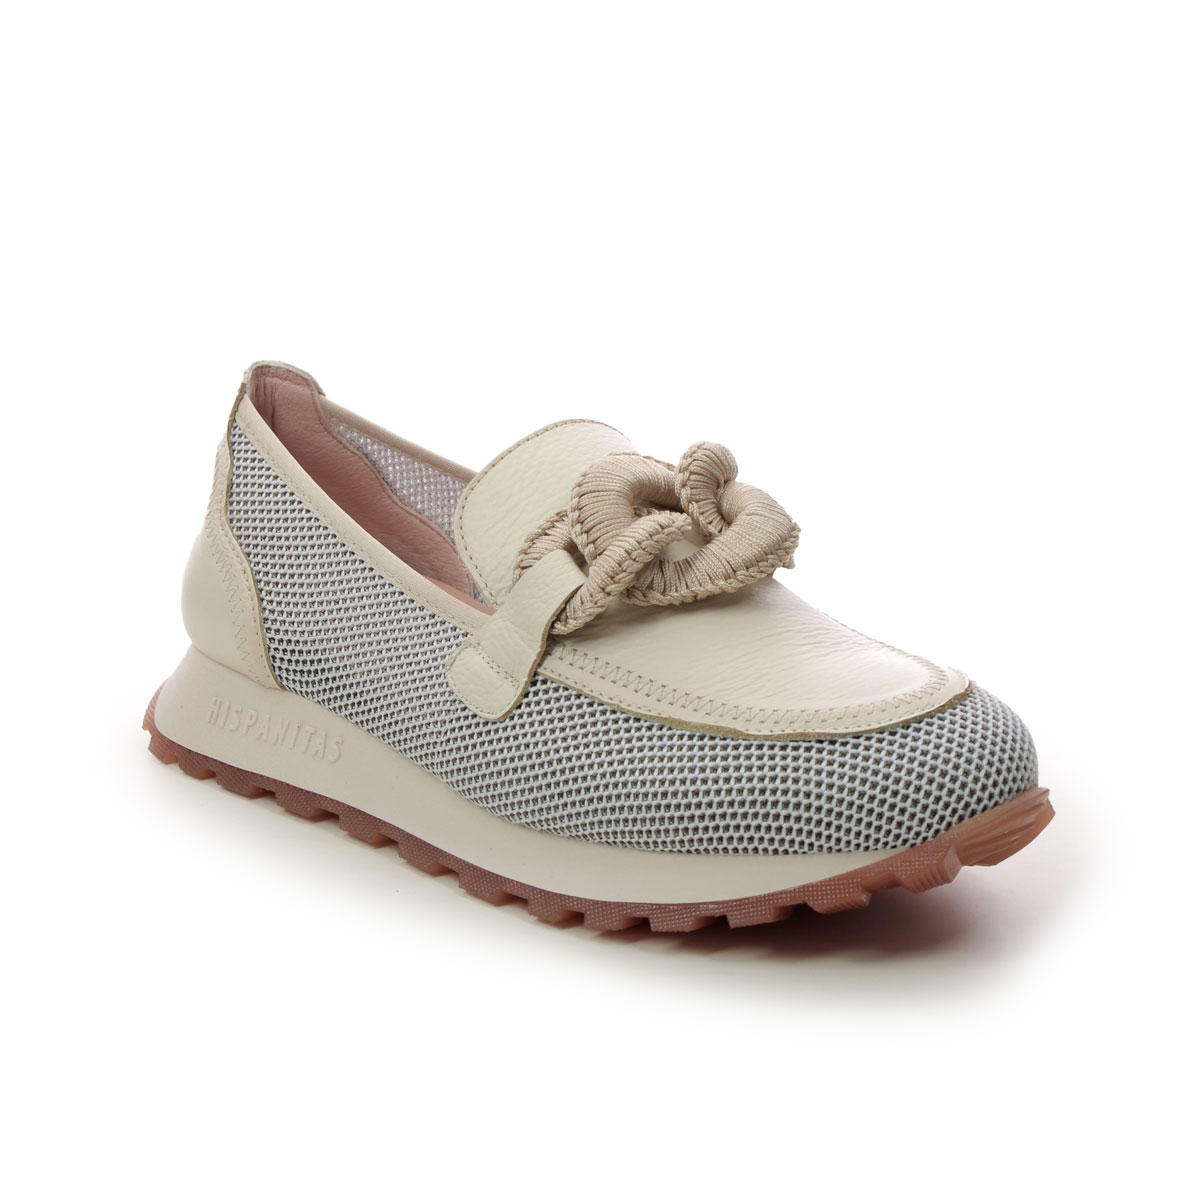 Hispanitas Loira Perf Loafer Beige leather Womens loafers HV243270-002 in a Plain Leather and Textile in Size 36